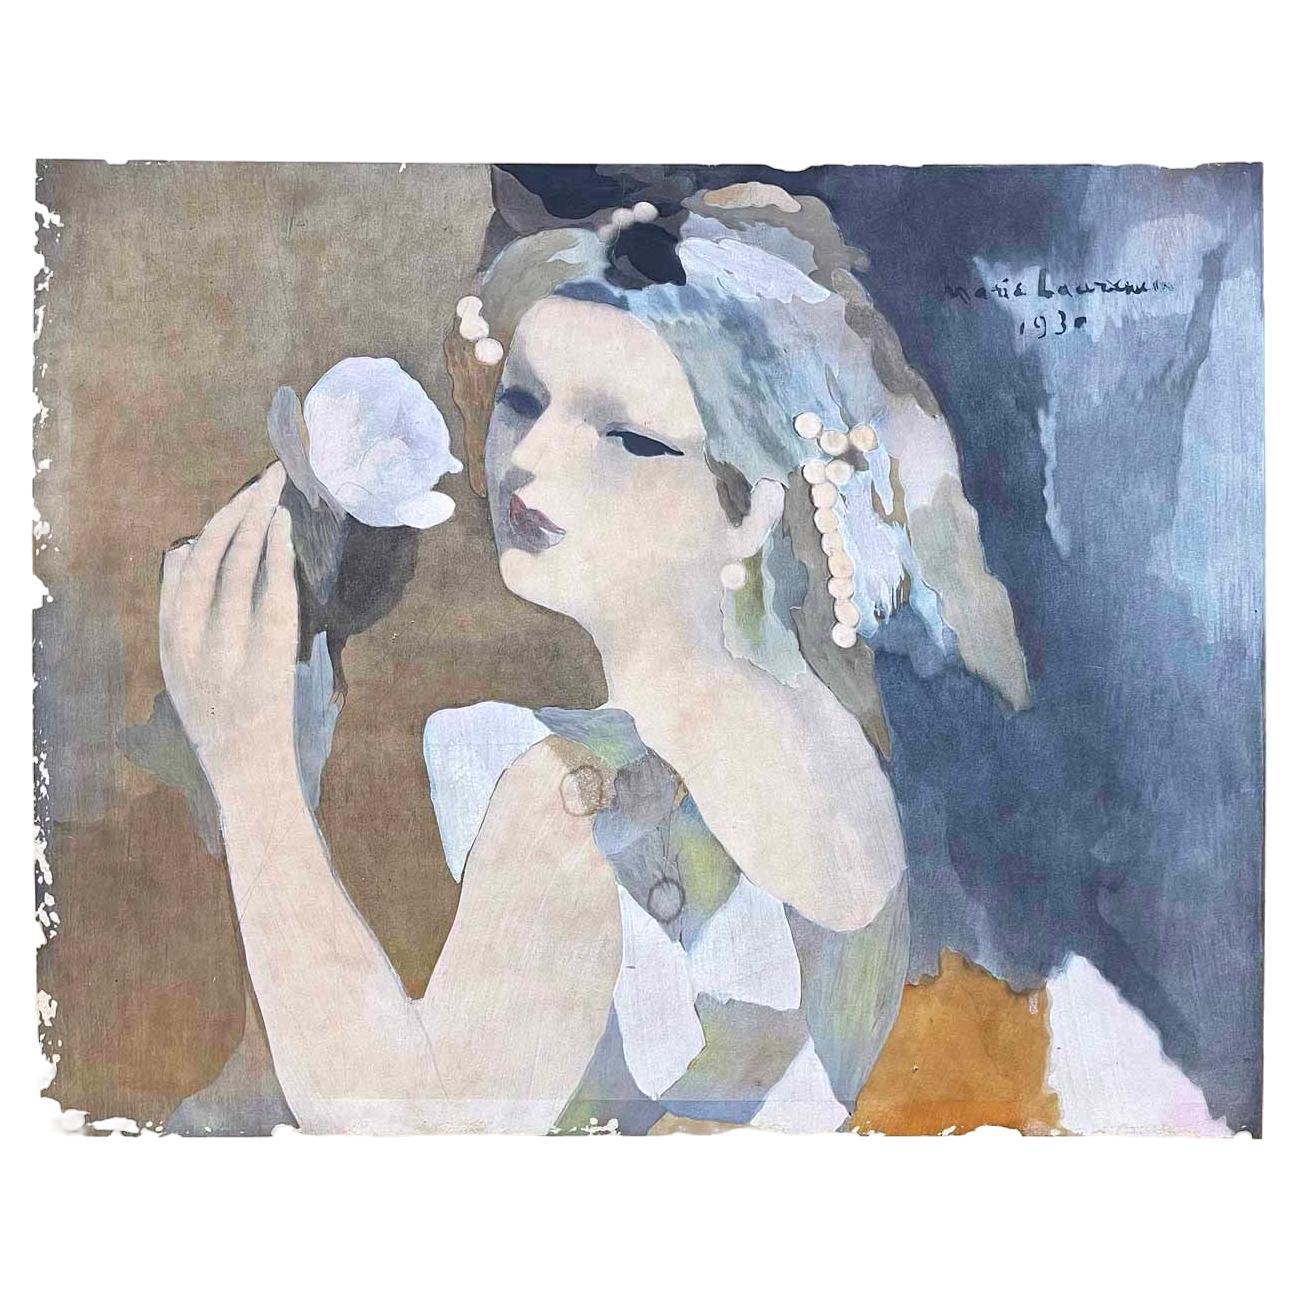 "Smelling the Rose", Stunning Painting by Marie Laurencin in Gray & Taupe, 1930